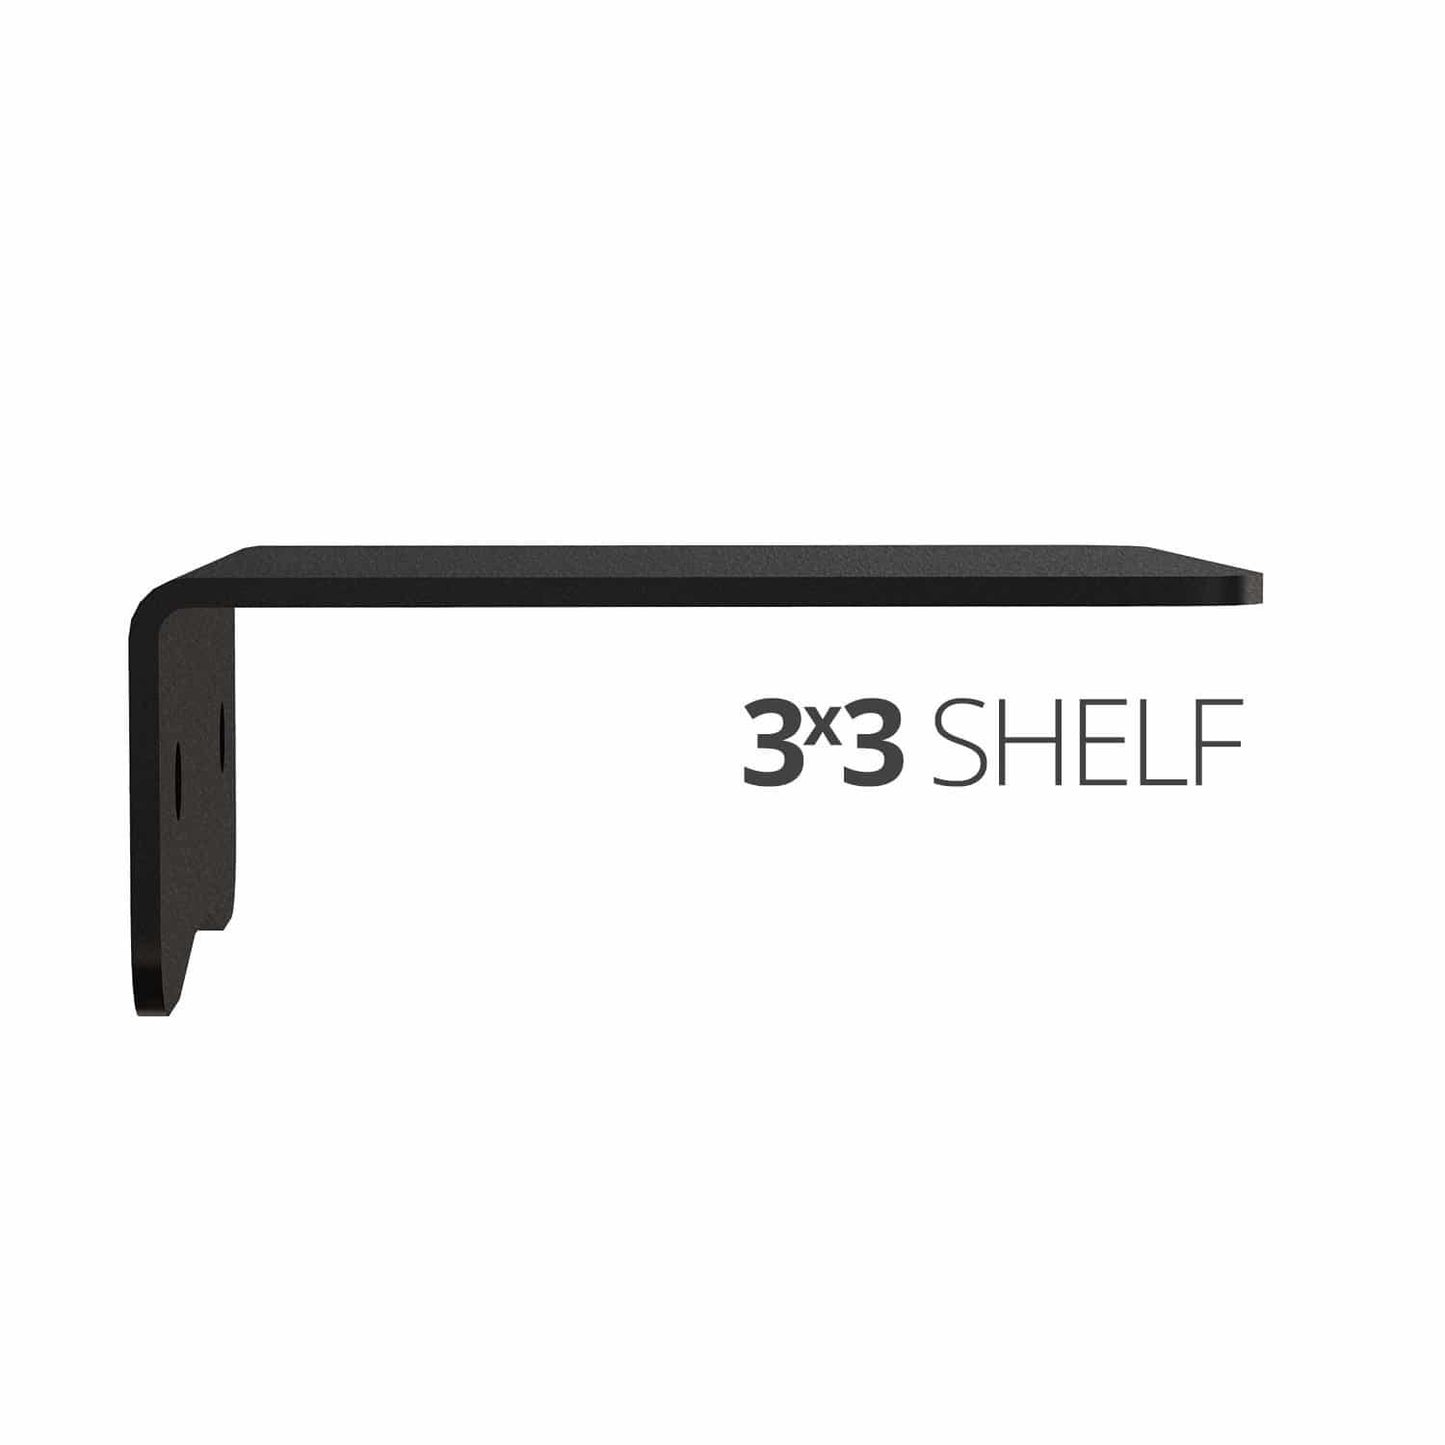 Small wall mounted shelf for home, office and garage - 3x3 side